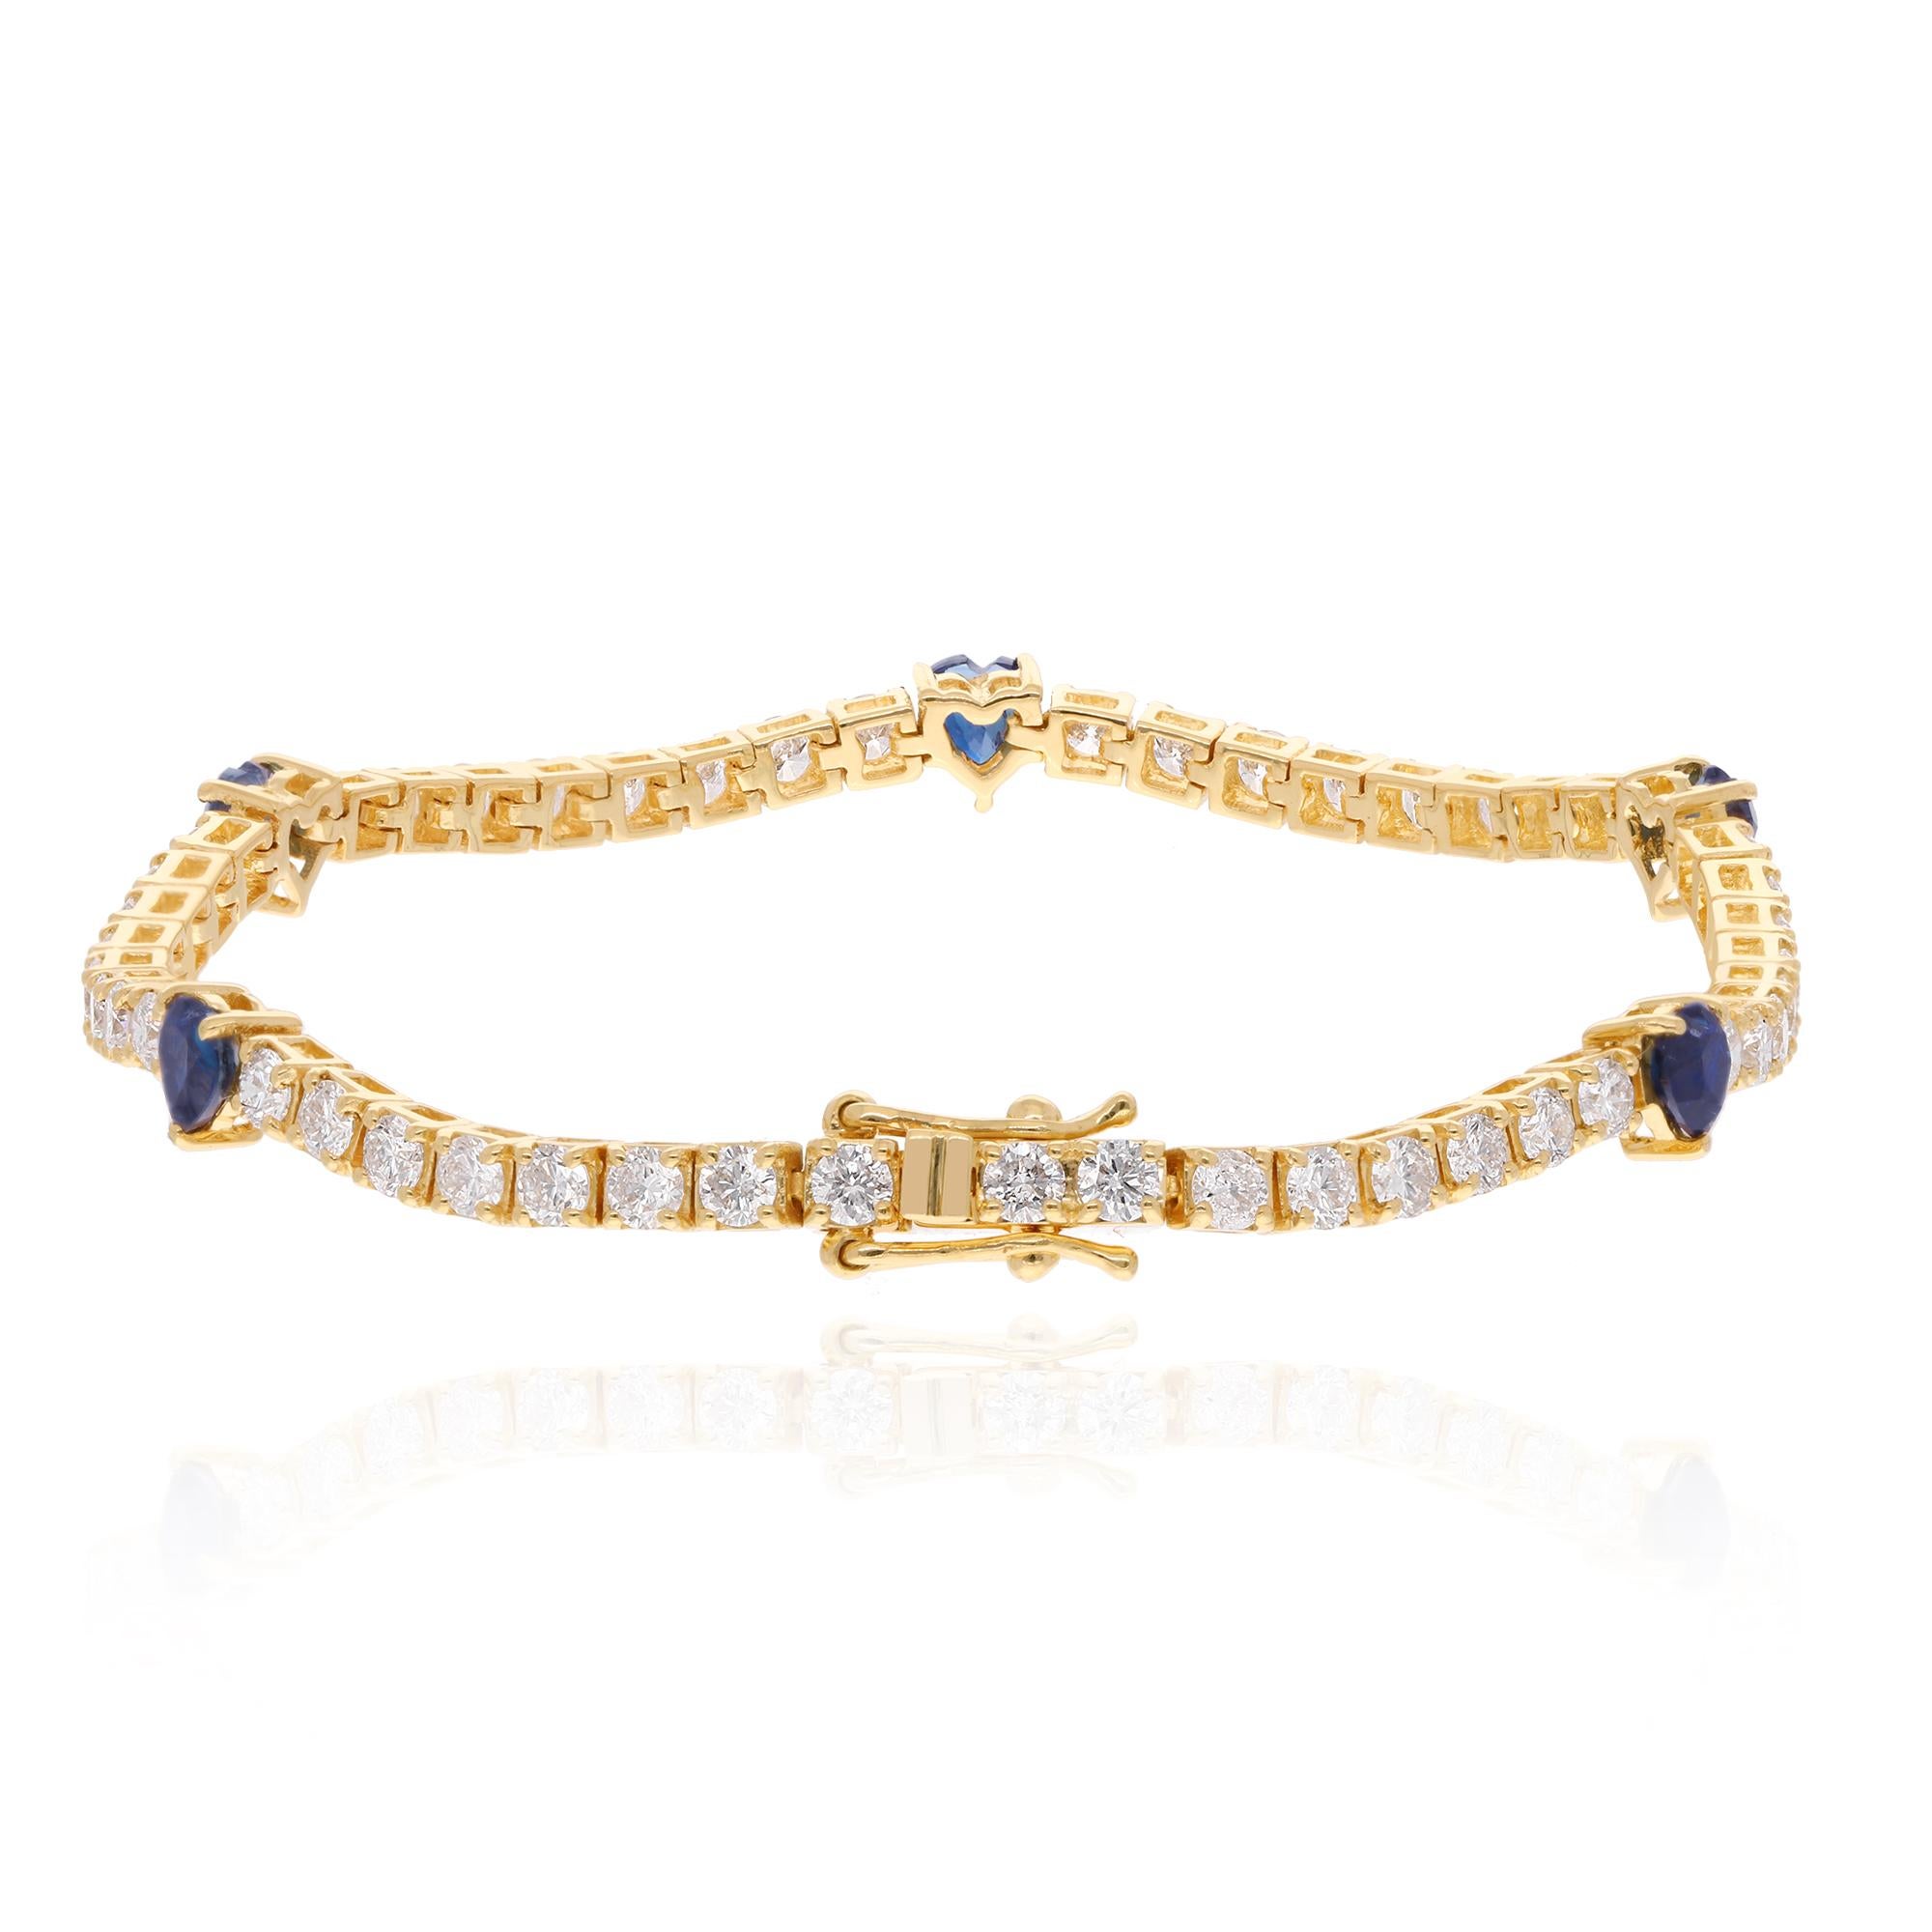 Item Code :- SJEBR-6120
Gross Wt. :- 7.83 gm
18k Yellow Gold Wt. :- 7.02 gm
Natural Diamond Wt. :- 2.50 Ct. ( AVERAGE DIAMOND CLARITY SI1-SI2 & COLOR H-I )
Blue Sapphire Wt. :- 1.55 Ct.
Bracelet Length :- 7 Inches

✦ Sizing
.....................
We